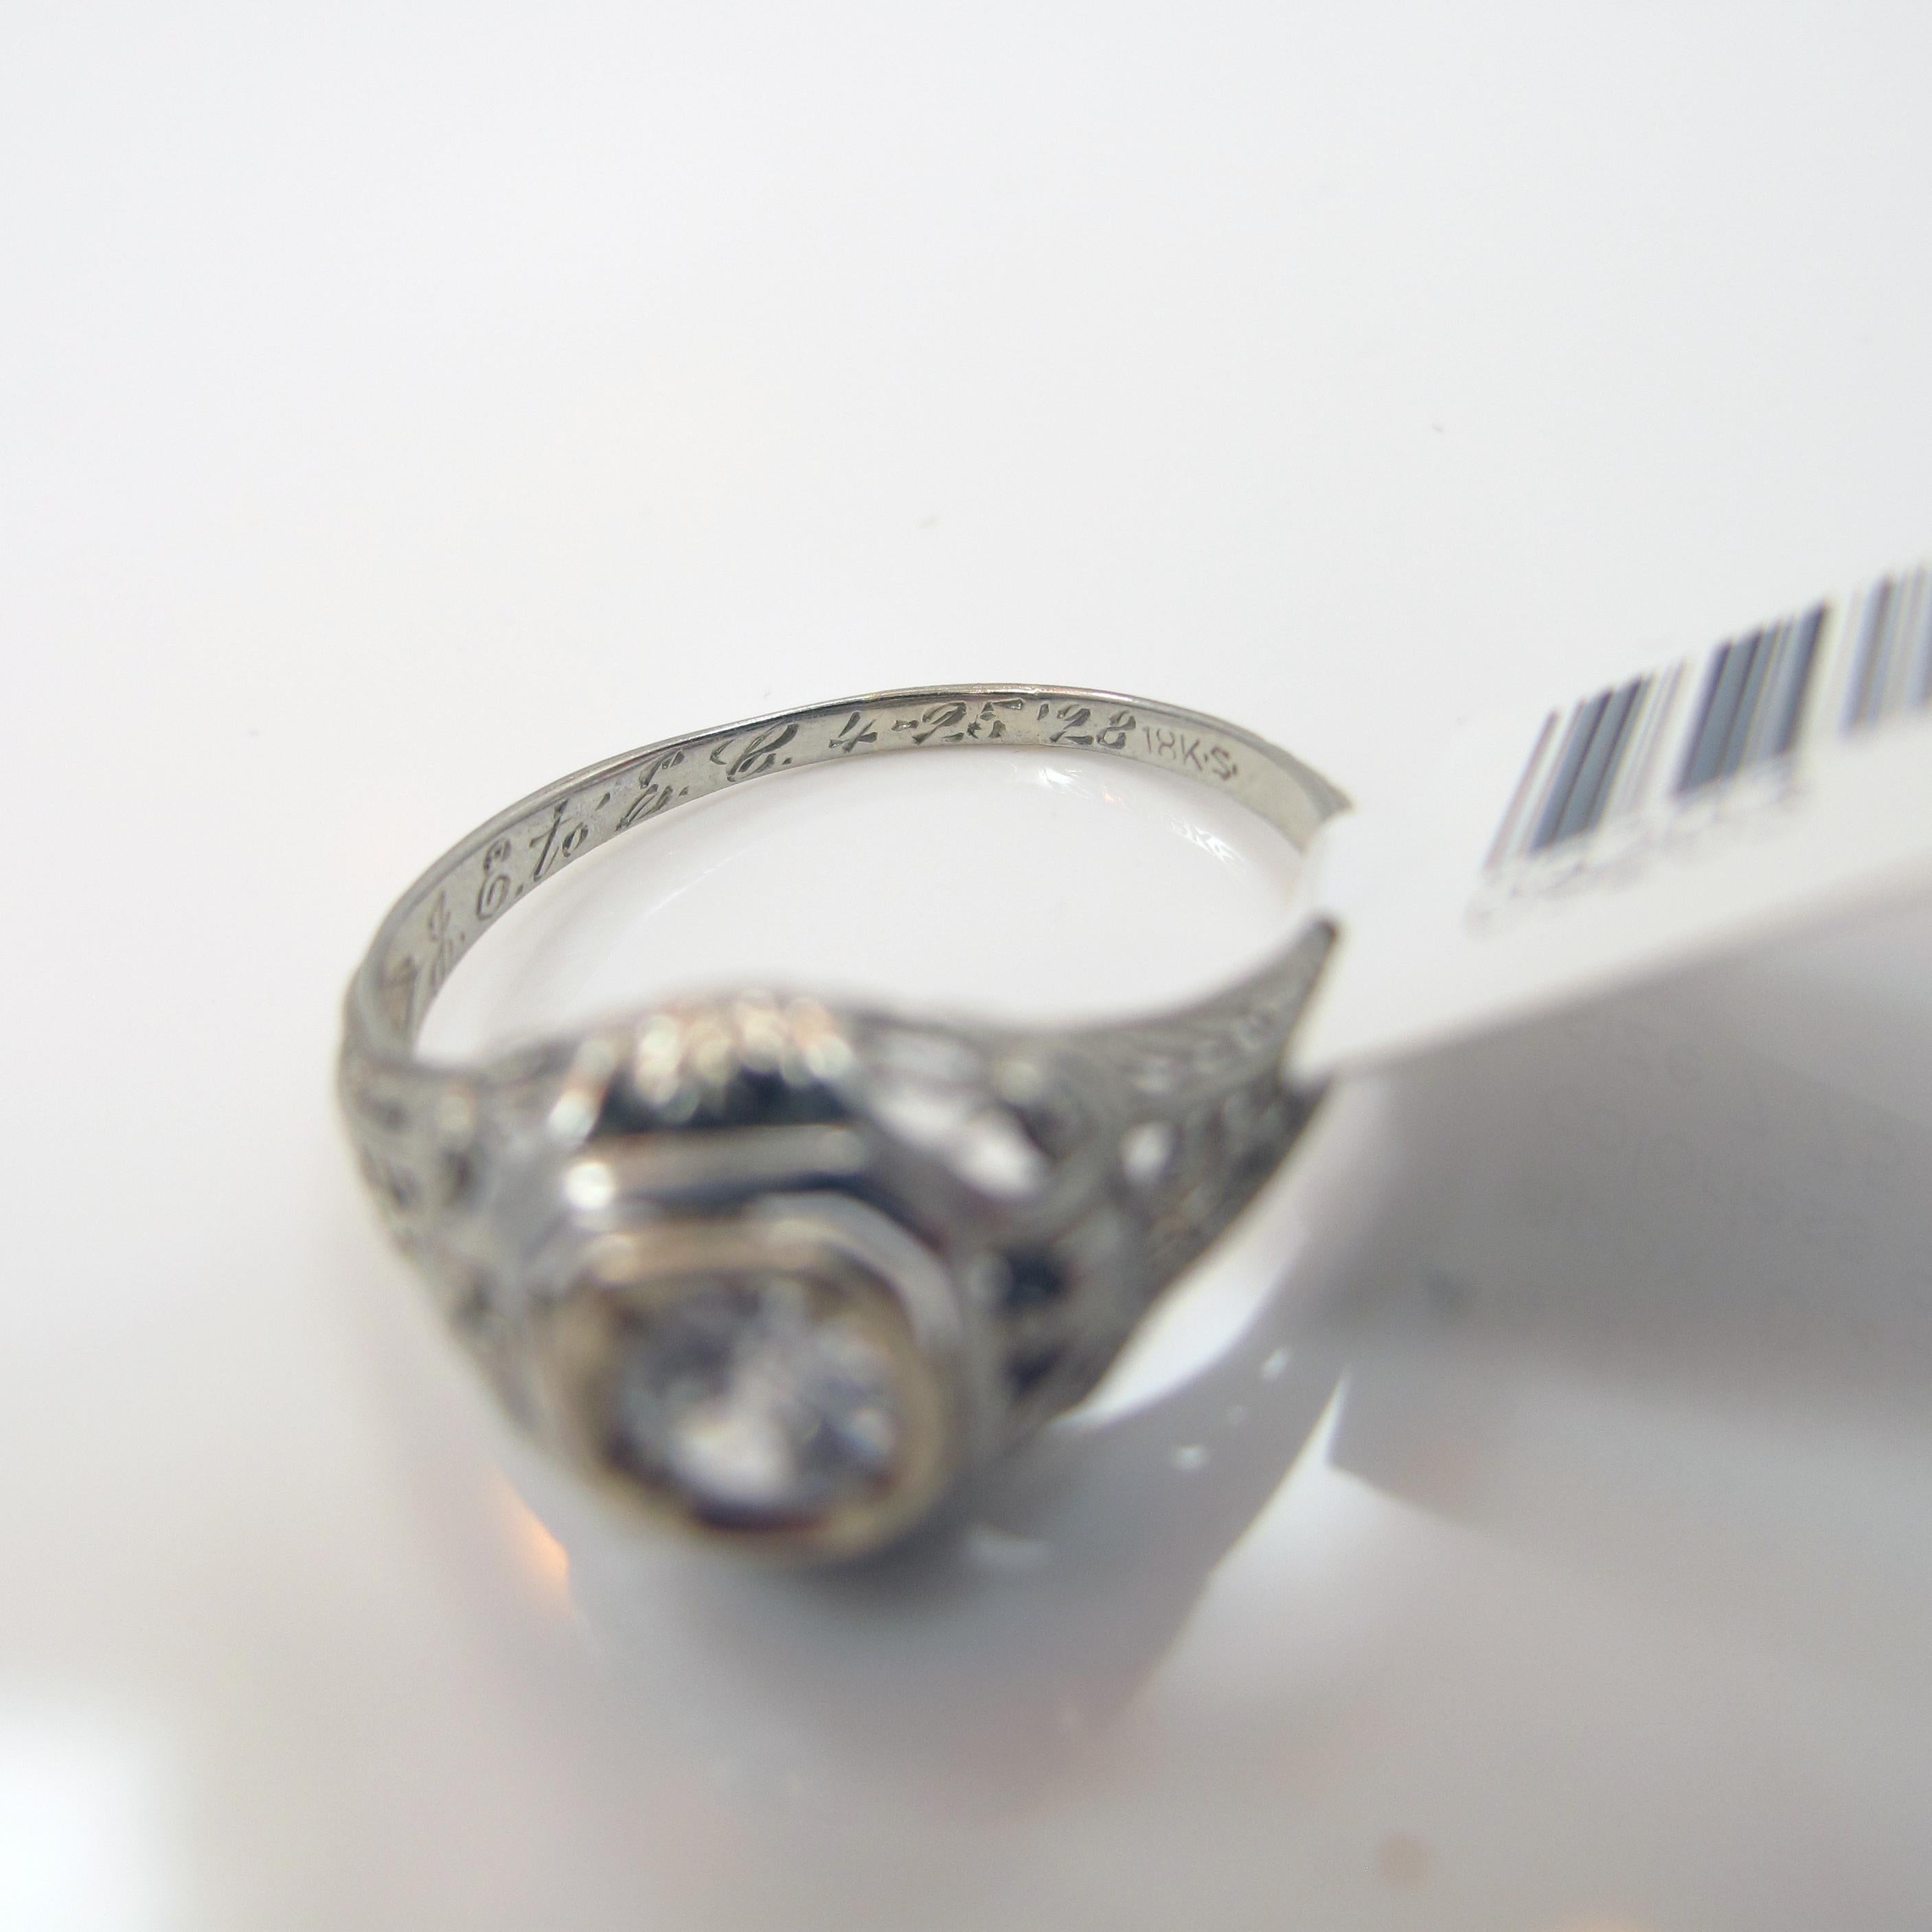 True vintage diamond ring set in 18k white gold. The ring contains one 4.15mm round old cut diamond weighing approximately 0.25ct, near colorless, SI  in clarity. The ring has engraving detail throughout. Size 7.75. Inquire about